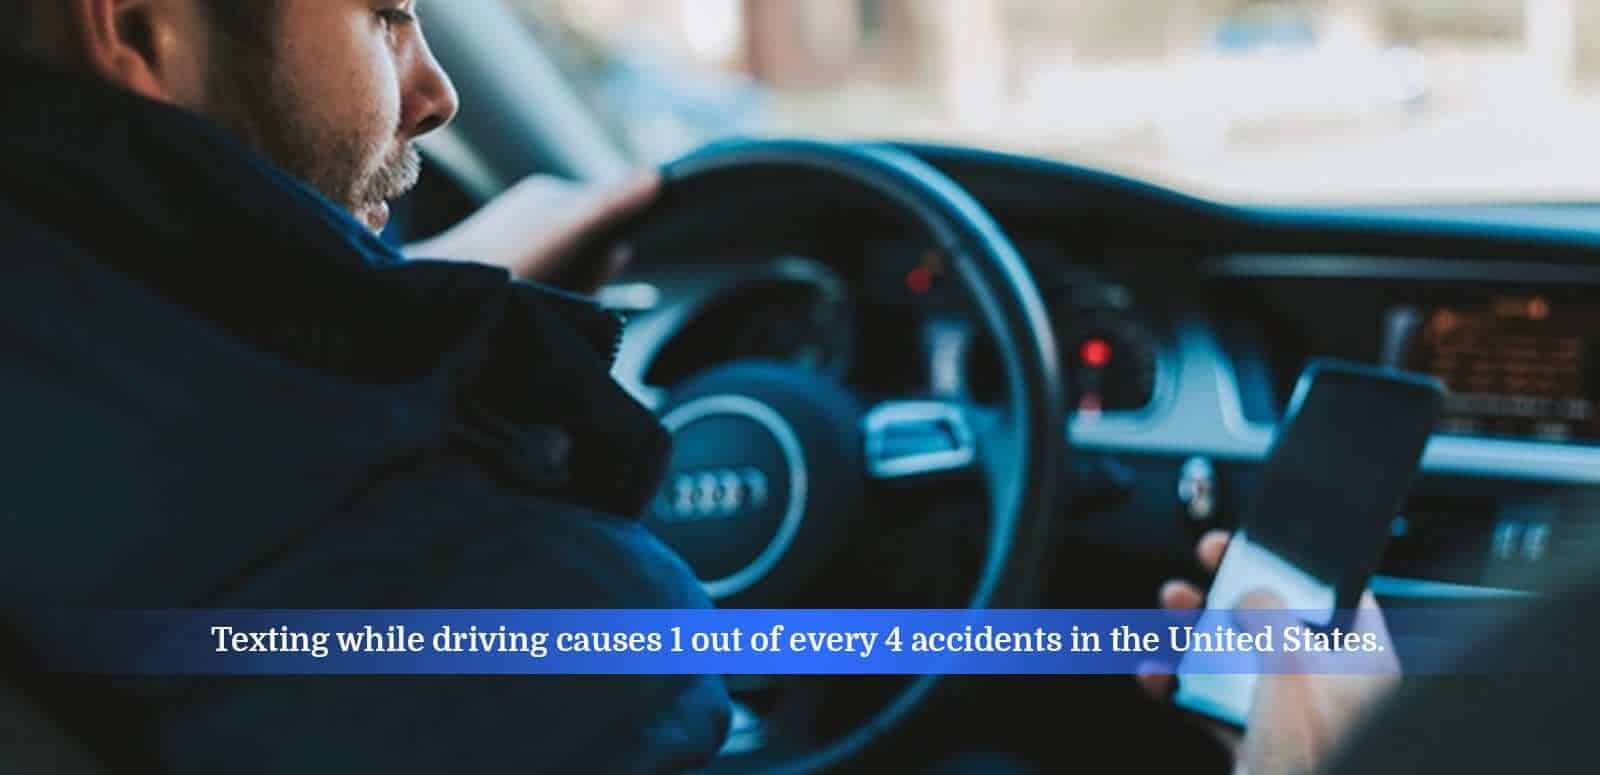 Texting while driving causes 1 out of every 4 accidents in the United States.
